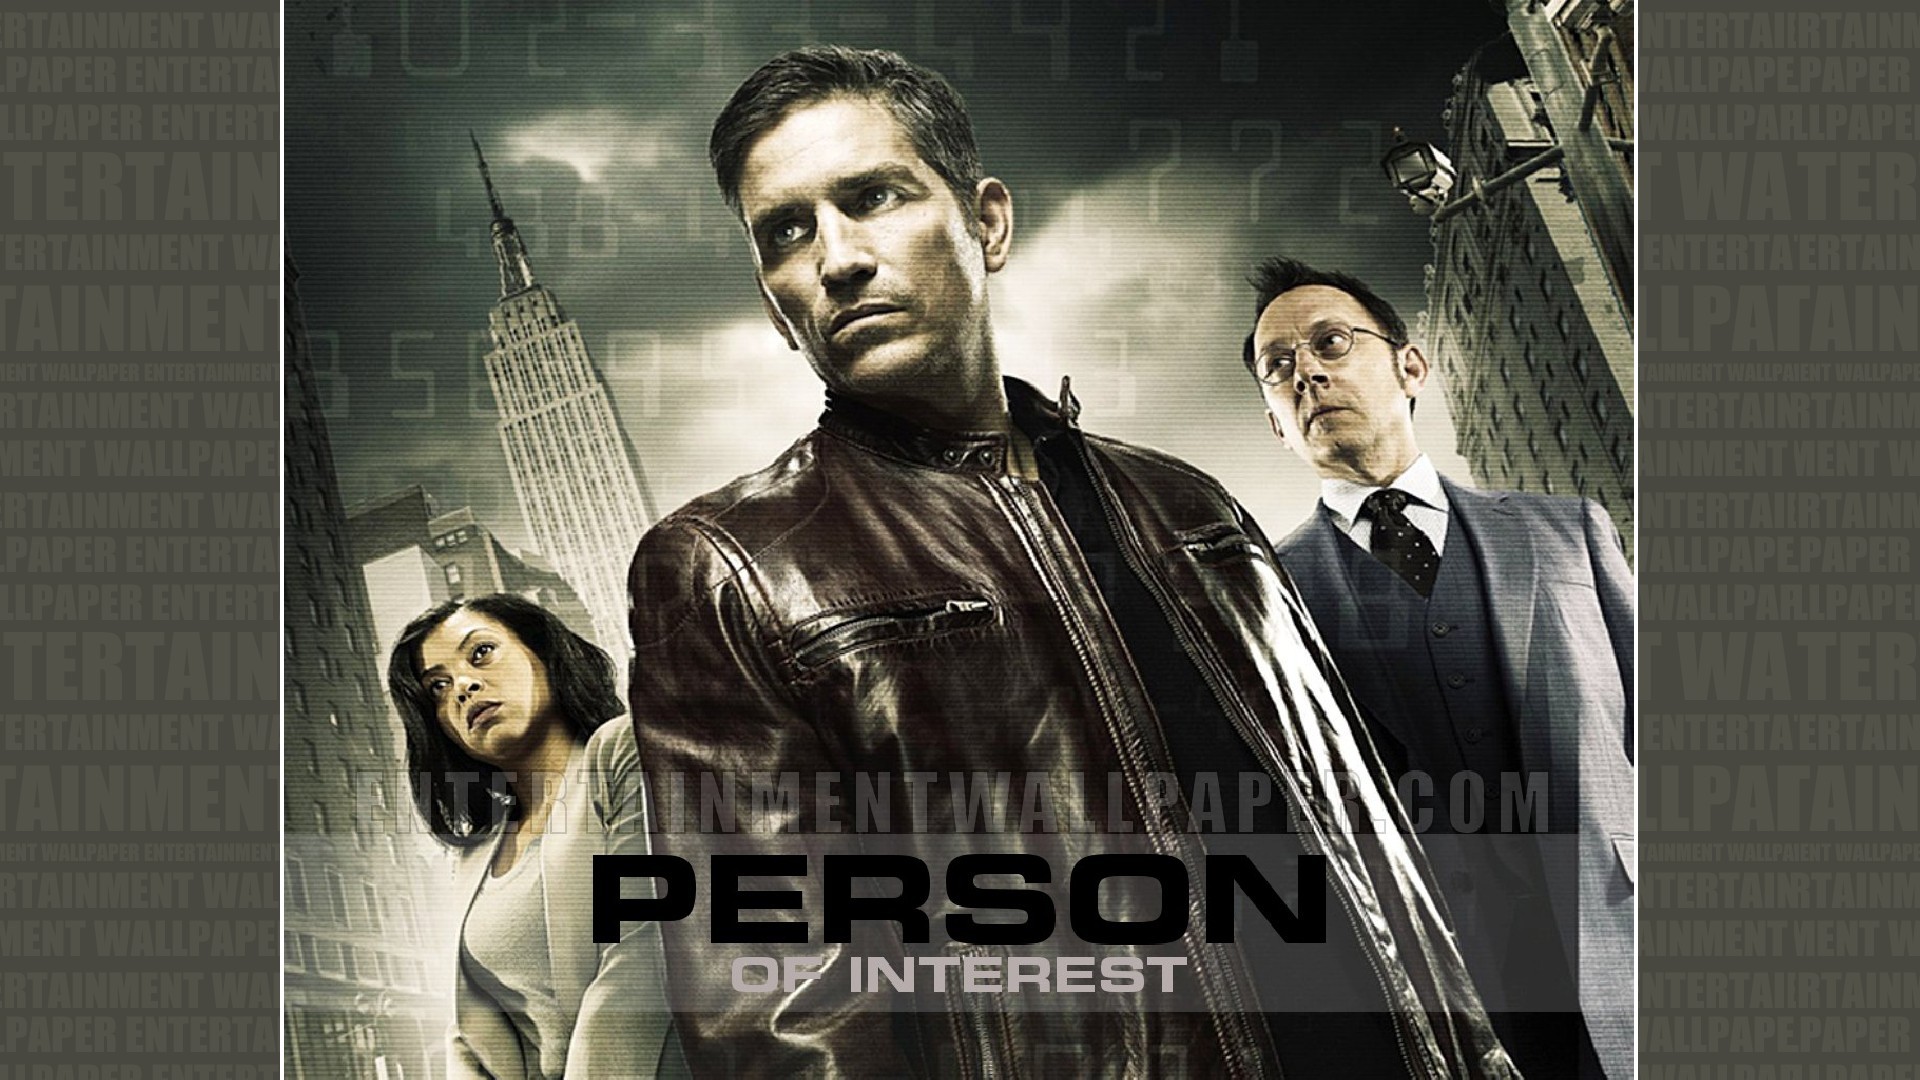 1920x1080 Person of Interest Wallpaper - Original size, download now.